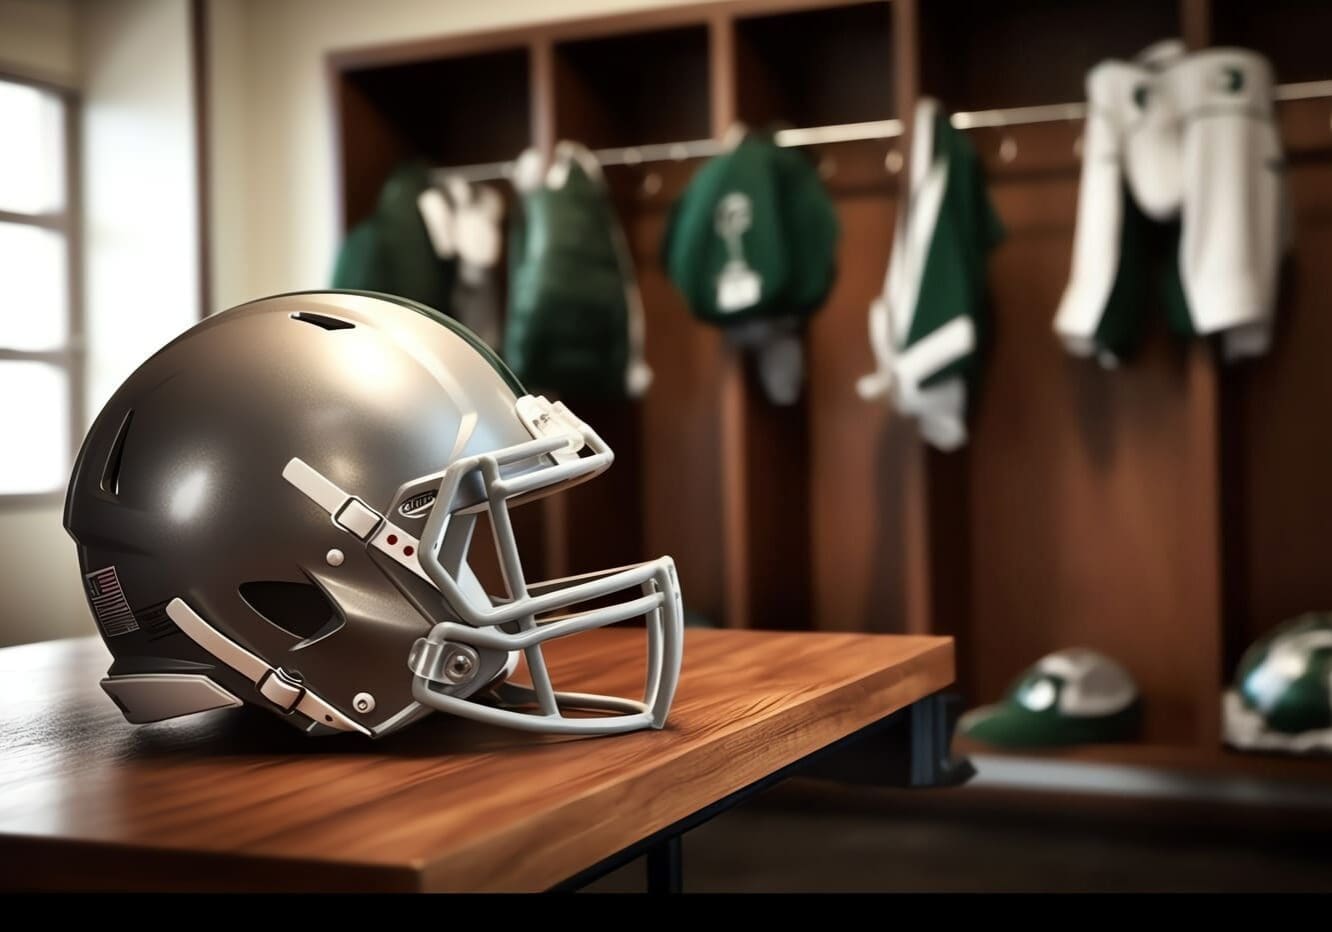 A football helmet resting on a wooden table, ready for the game.